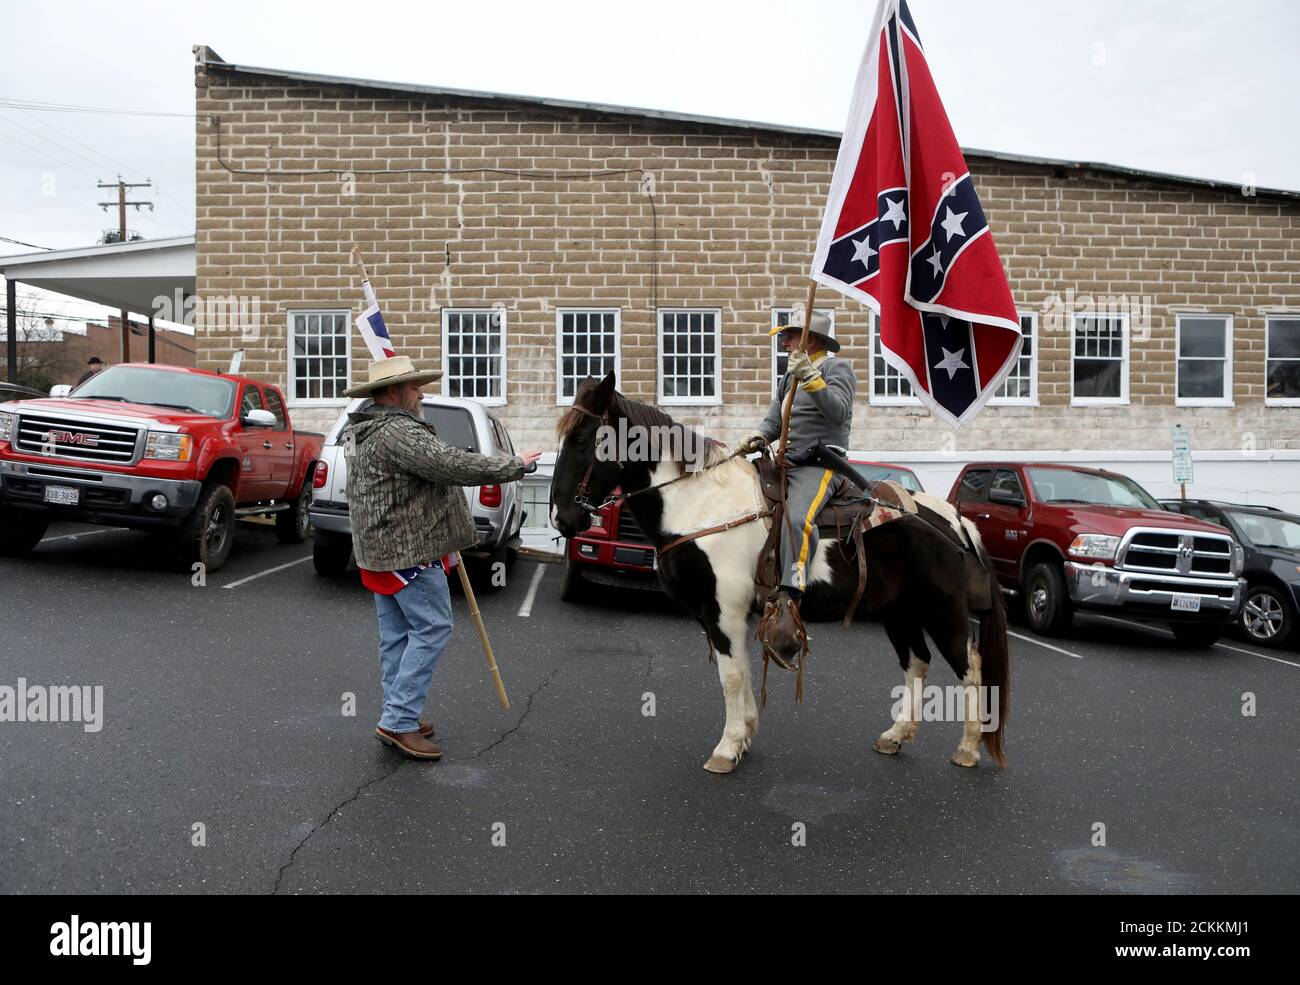 Supporters of the continued display of Confederate generals’ statues and other symbols finish a march holding Confederate flags in Lexington, Virginia, U.S. January 18, 2020. REUTERS/Jim Urquhart Stock Photo